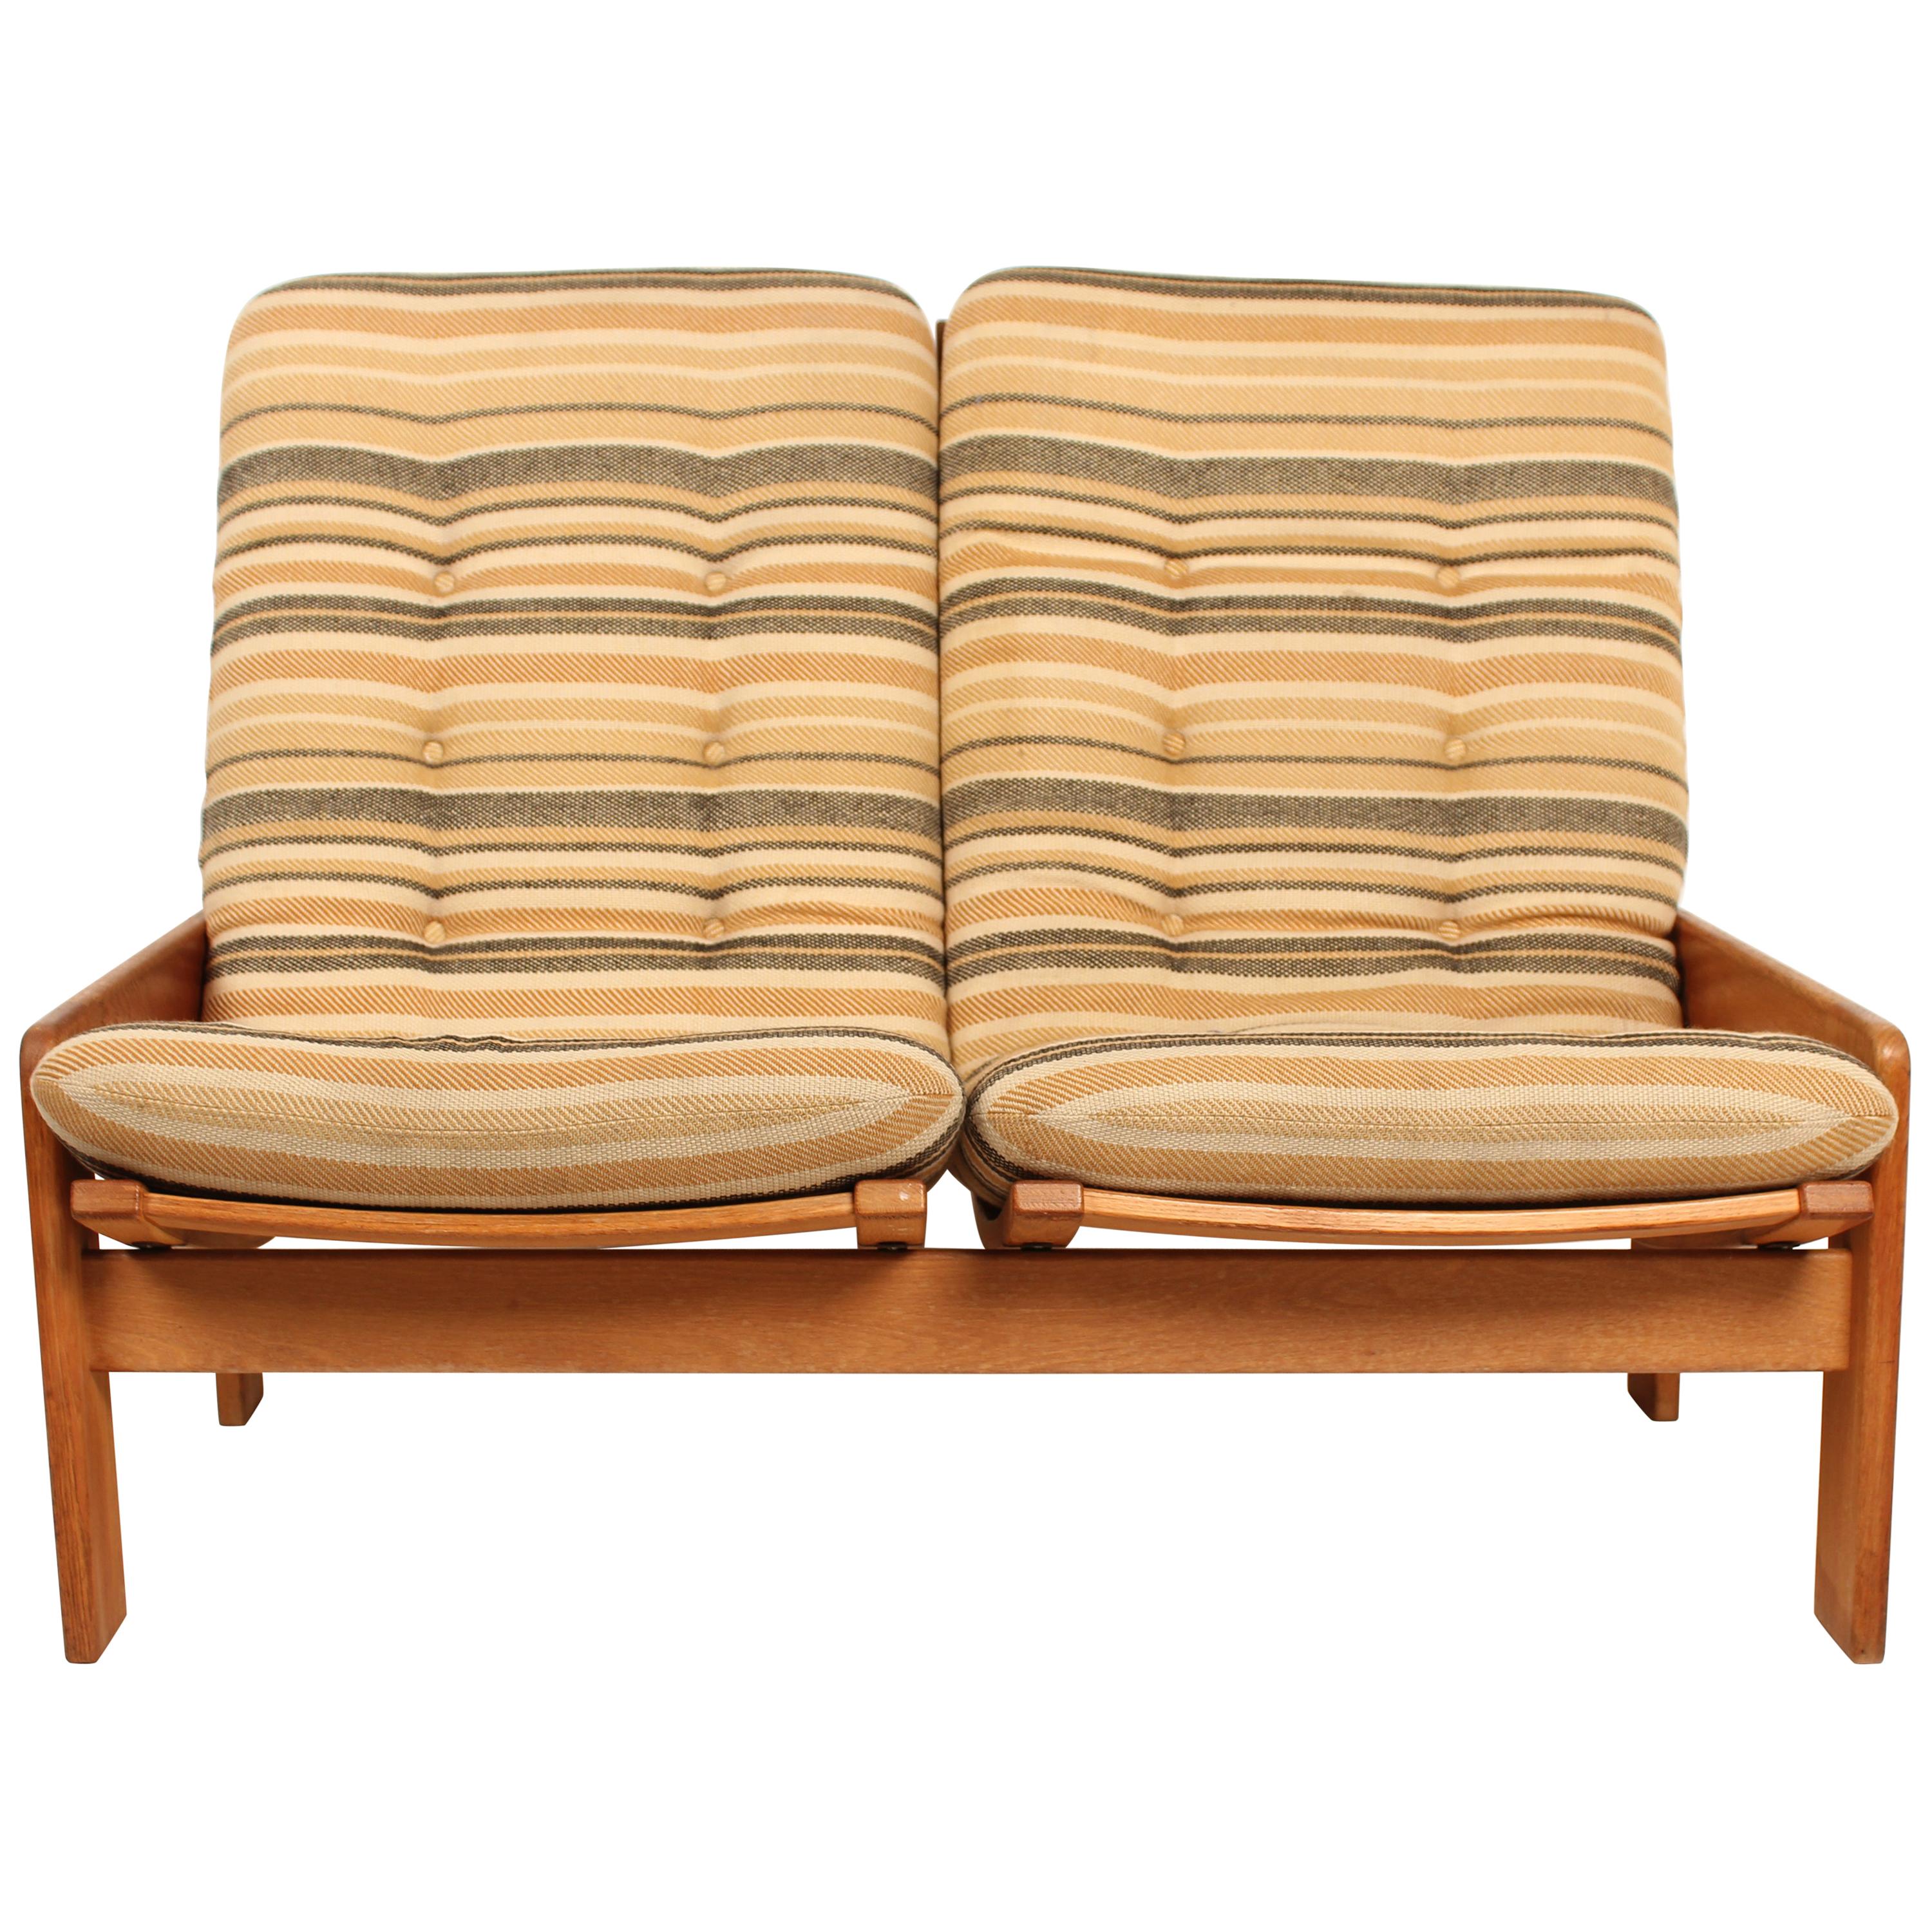 2-Seat Sofa by Yngve Ekstrom for Swedese, 1960 Sweden For Sale